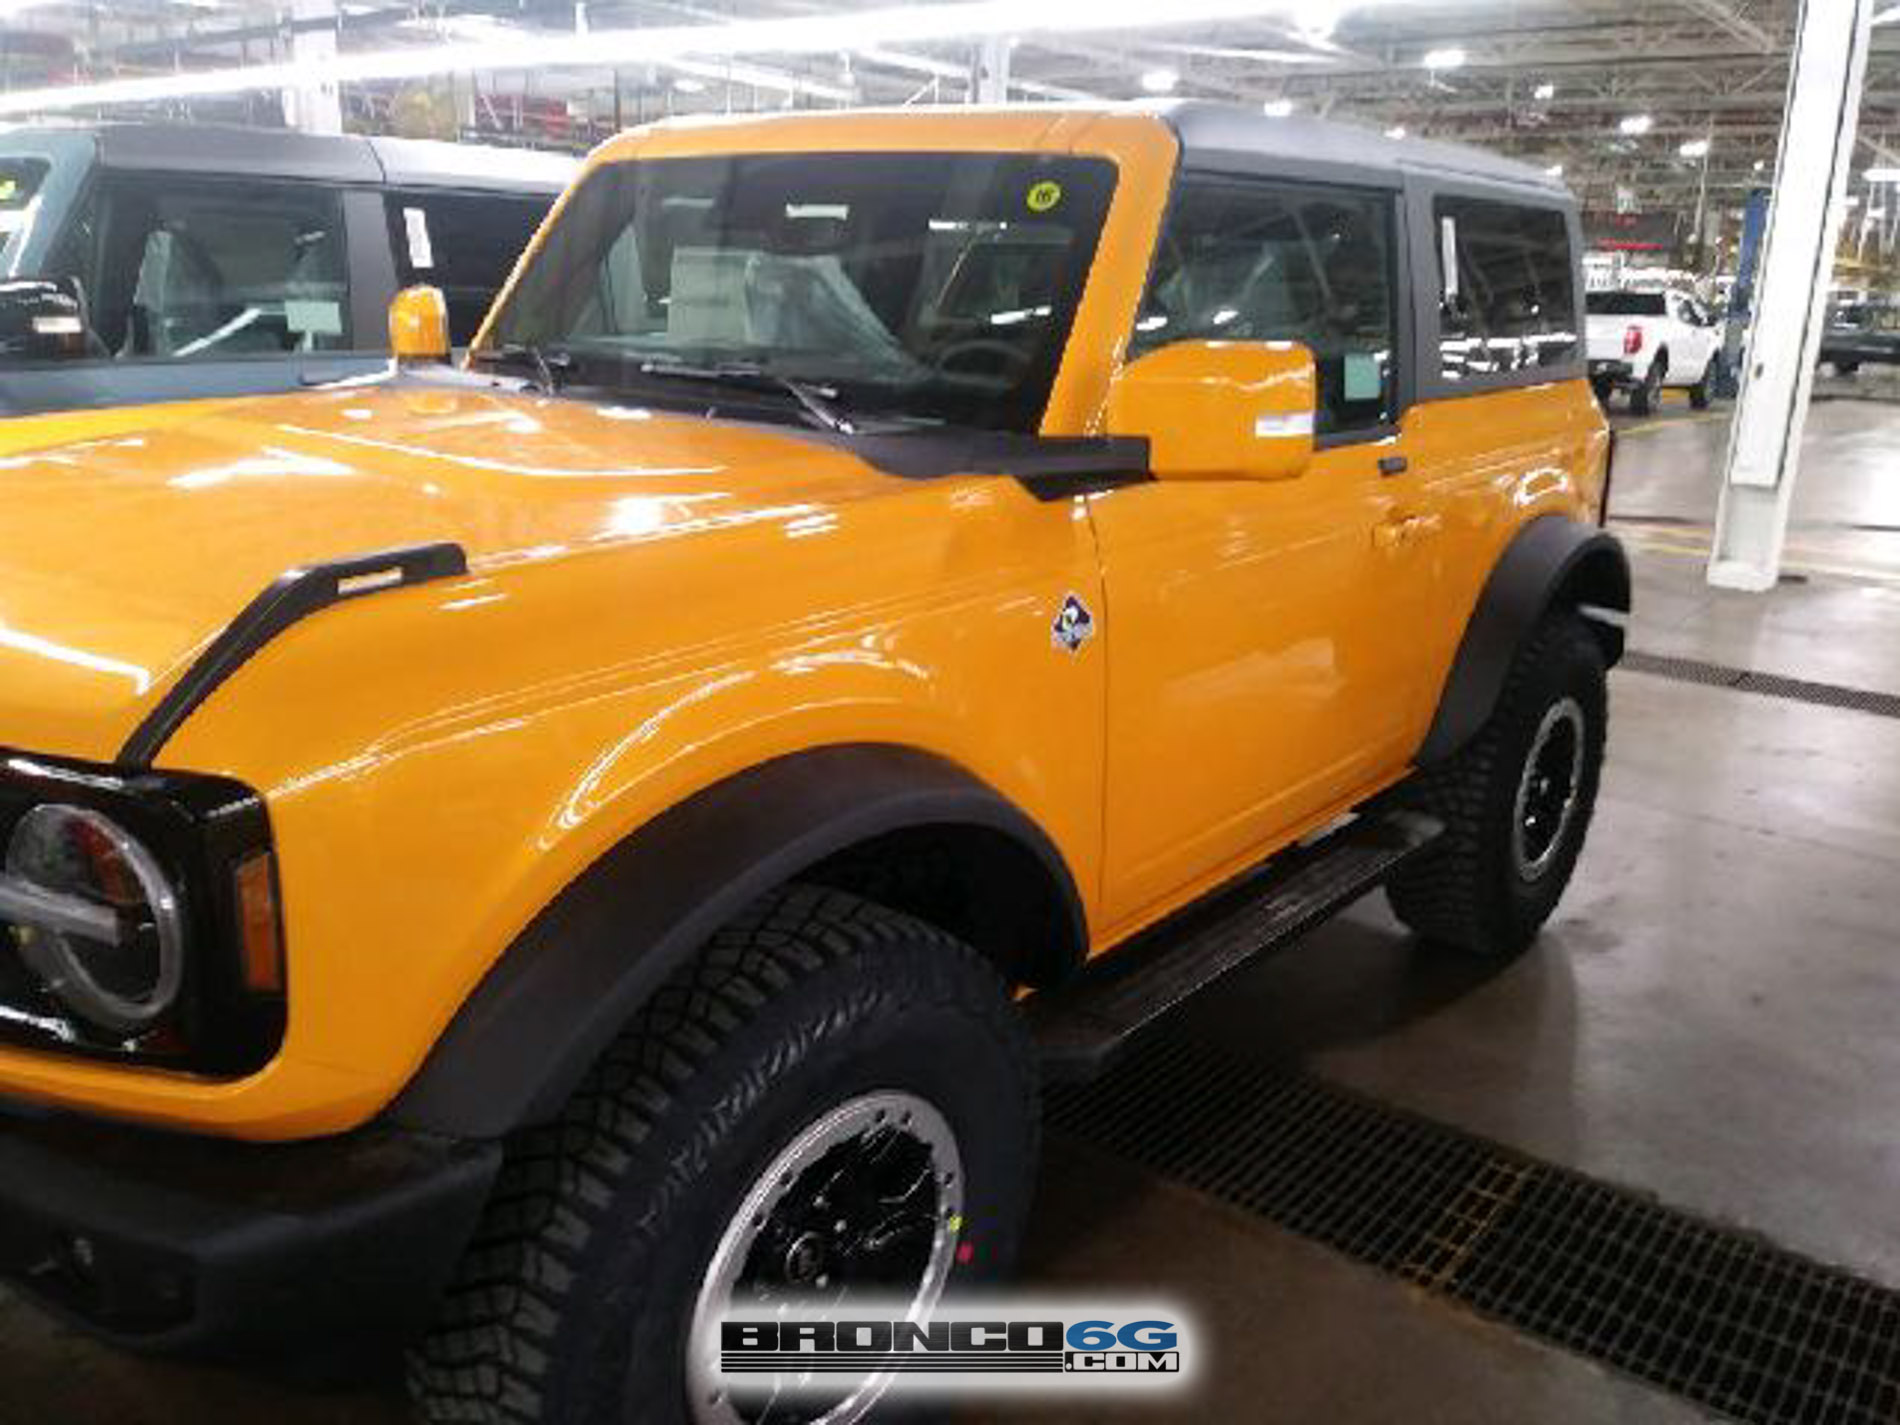 Ford Bronco 20+ Sandstone Cloth, Roast Cloth Seats Interior Pics From Factory ⚡?? 2021 Bronco Cyber Orange 2 door Outer Banks